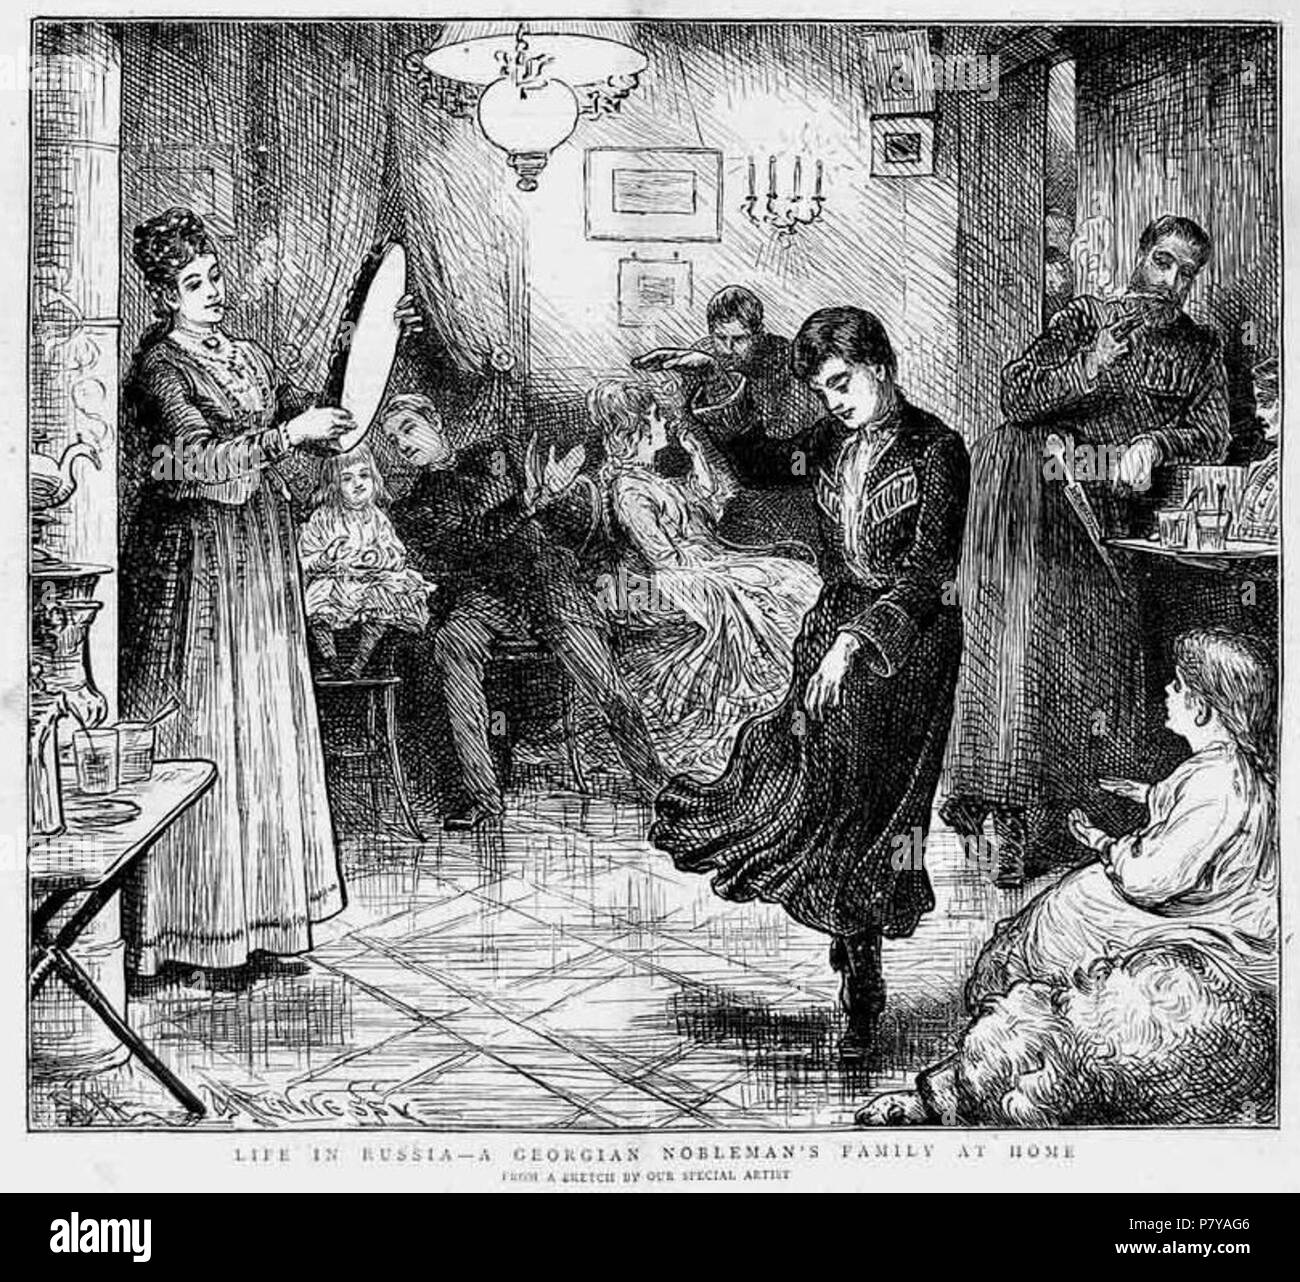 English: A Georgian noble family from the Imperial Russian times as illustrated in the 1874 edition of the British weekly The Graphic. 1874 247 Life in Russia - Georgian nobleman's family at home. The Graphic, 1874 Stock Photo